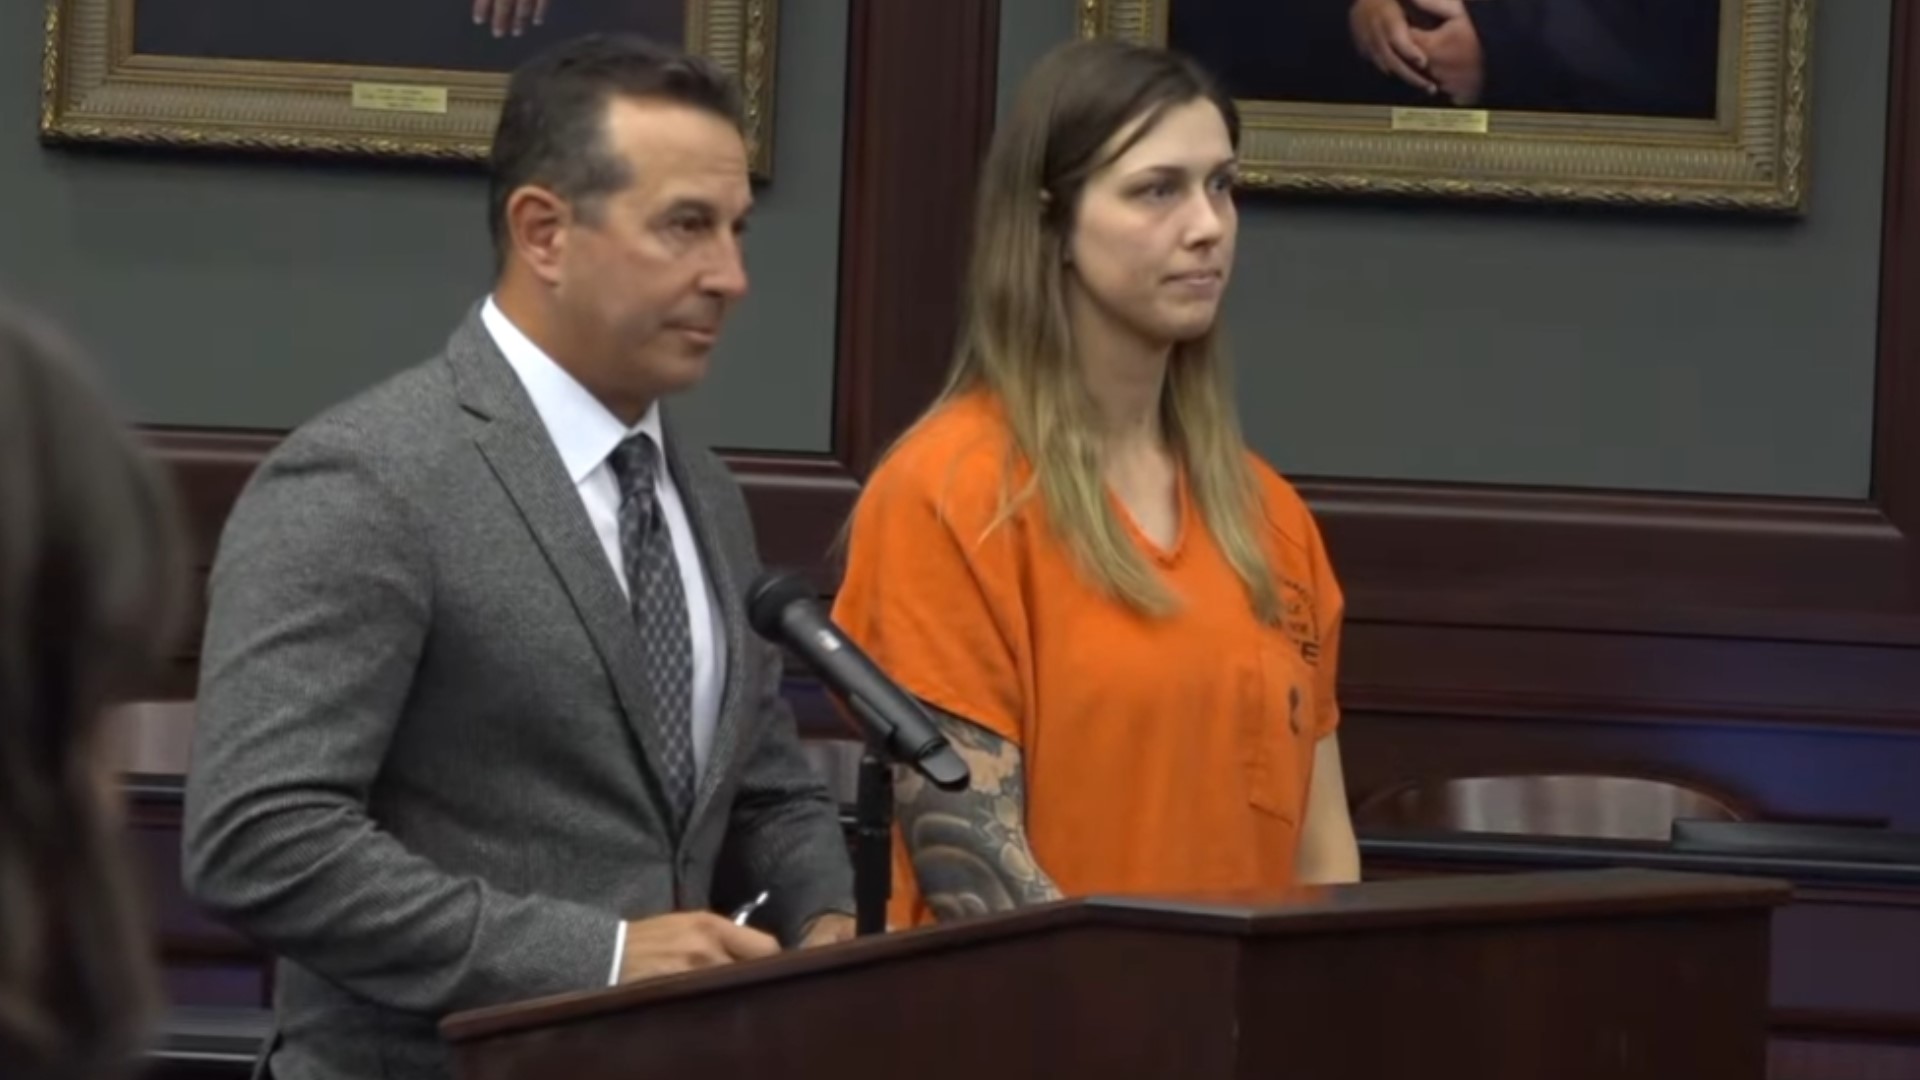 Shanna Gardner faces the death penalty and is charged with murder. Prosecutors say she played a role in a plot to kill her ex-husband, Jared Bridegan, in 2022.